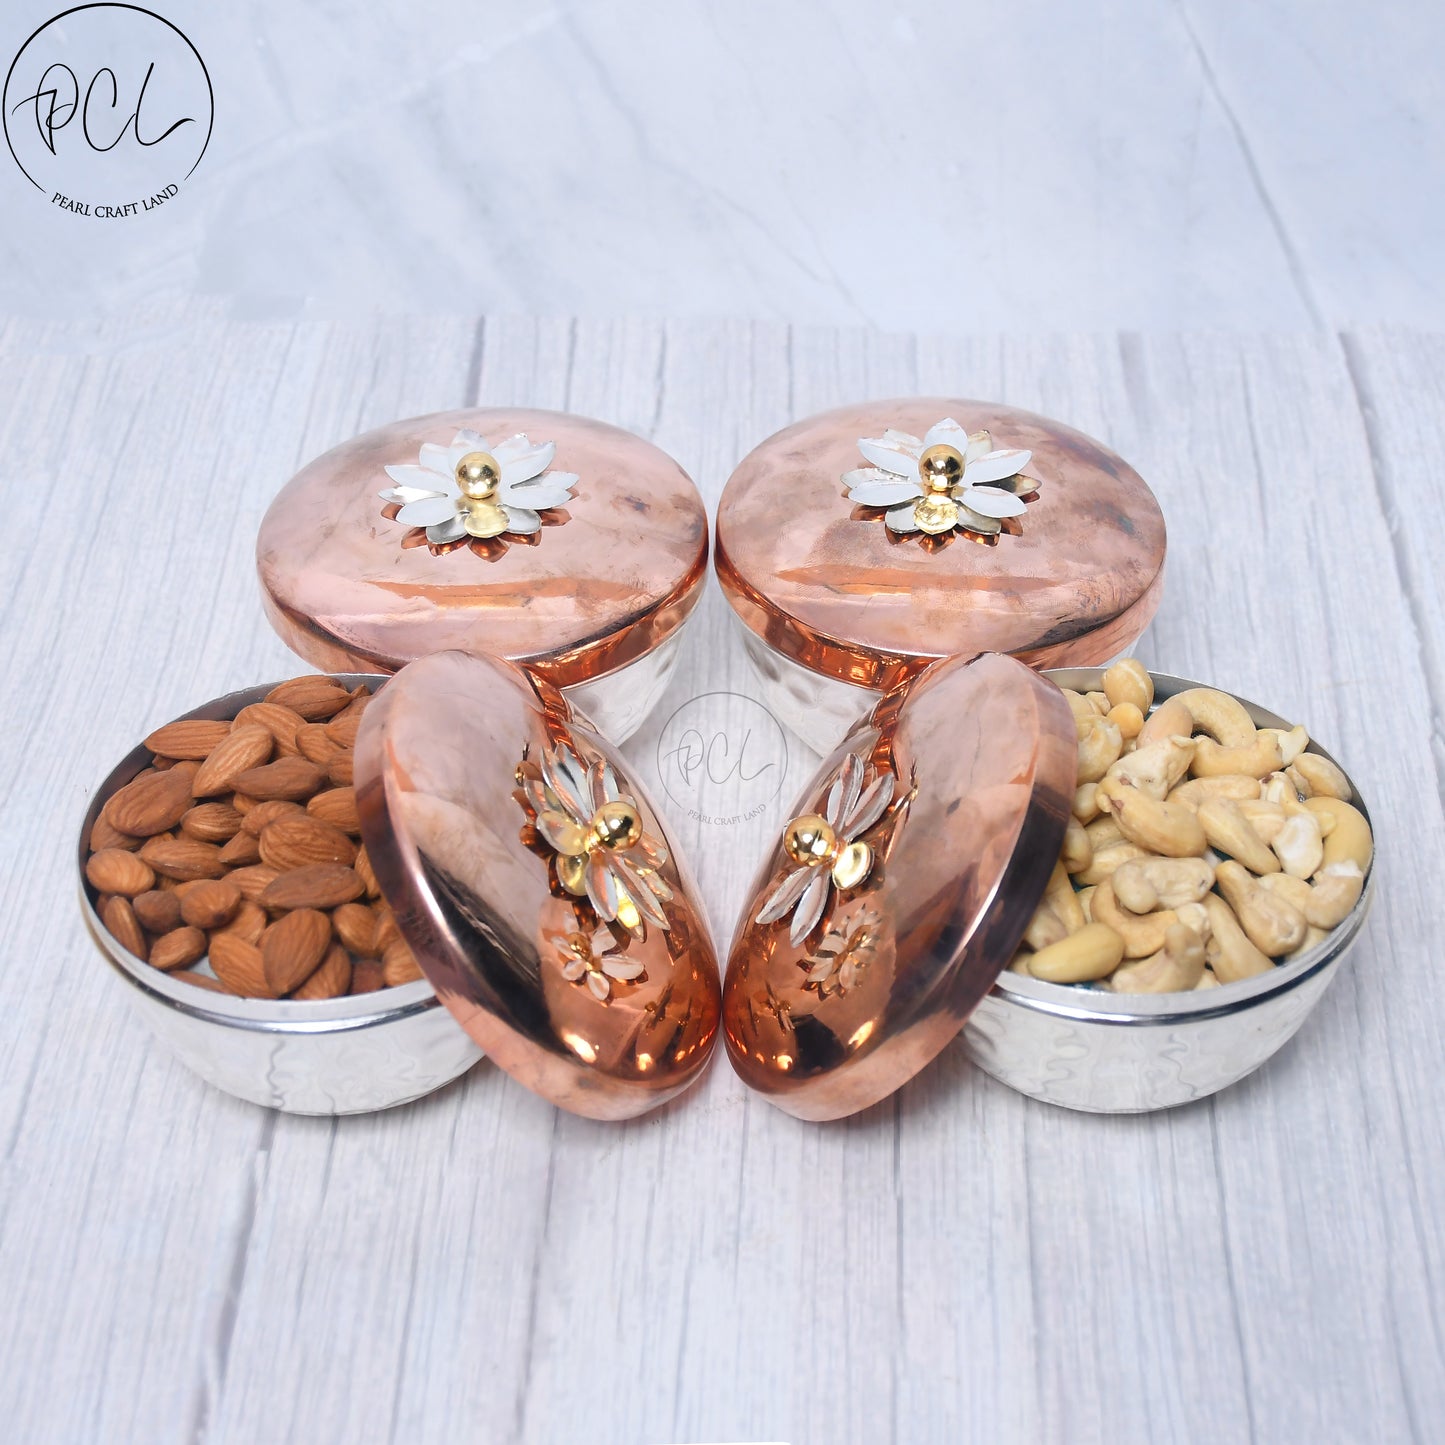 Exclusive Silver Hammered Dry Fruit Bowl with Gifting Box Set of 4